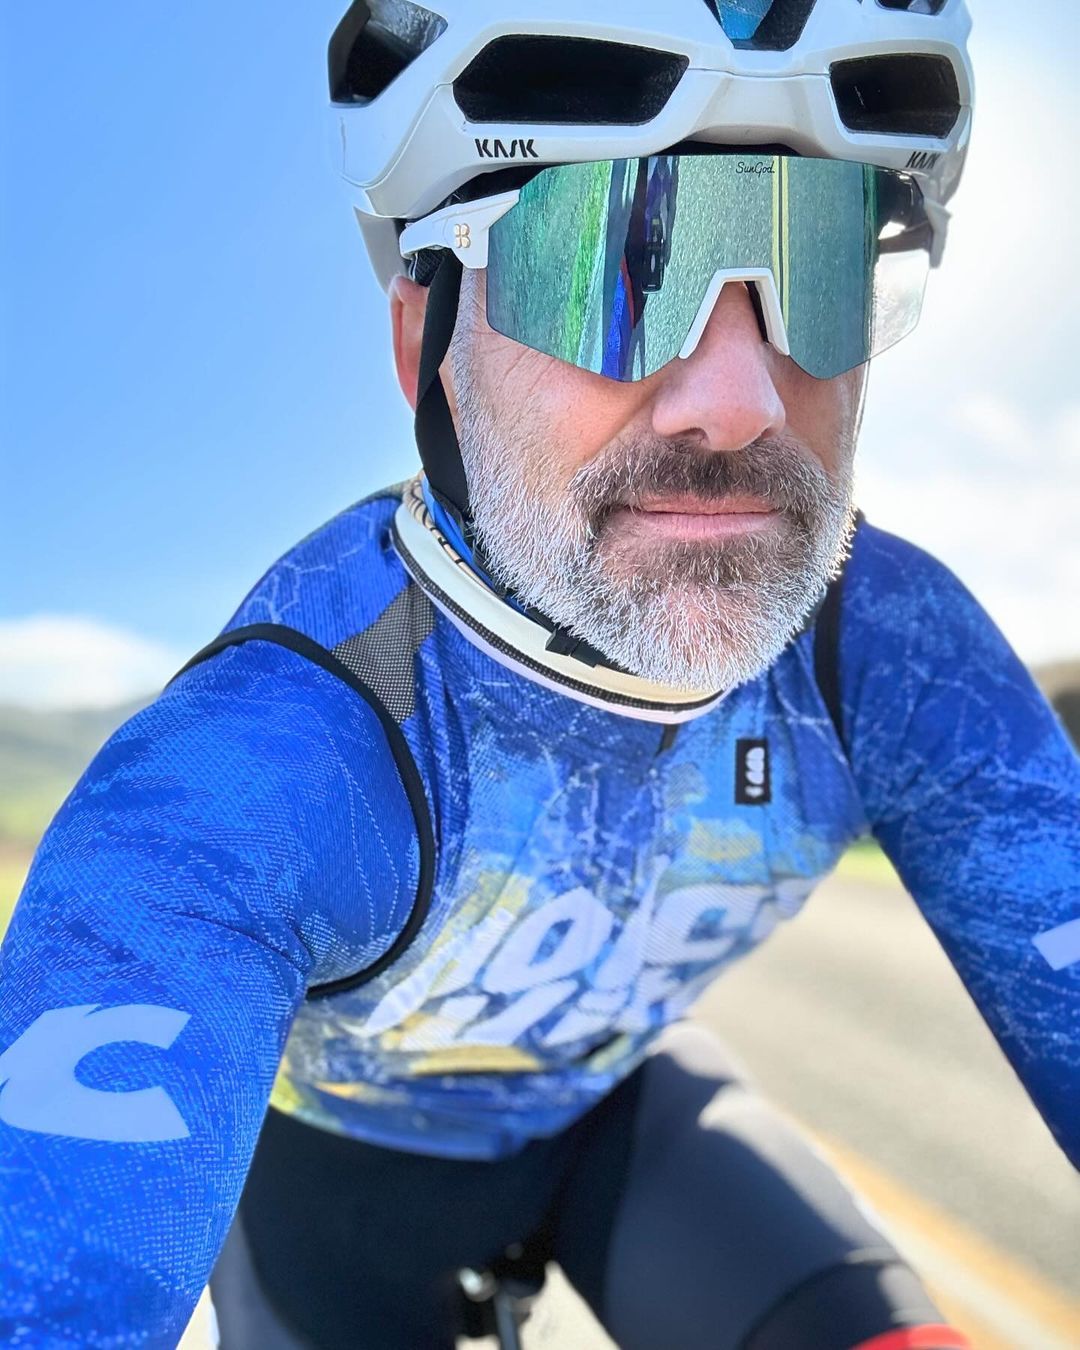 New kit day and the beginning of the winter break! Thanks to @jkbrkb for designing an epic #20thanniversary DVC kit, and to @sportful for making it all come together! 

@sportful @sfitalianathleticclub @equatorcoffees @poggio_labs @achieveptc @tripsforkidsmarin @sage.realestategroup @marinservicecourse @jkbrkb #themenkegeoup #onewealthadvisors